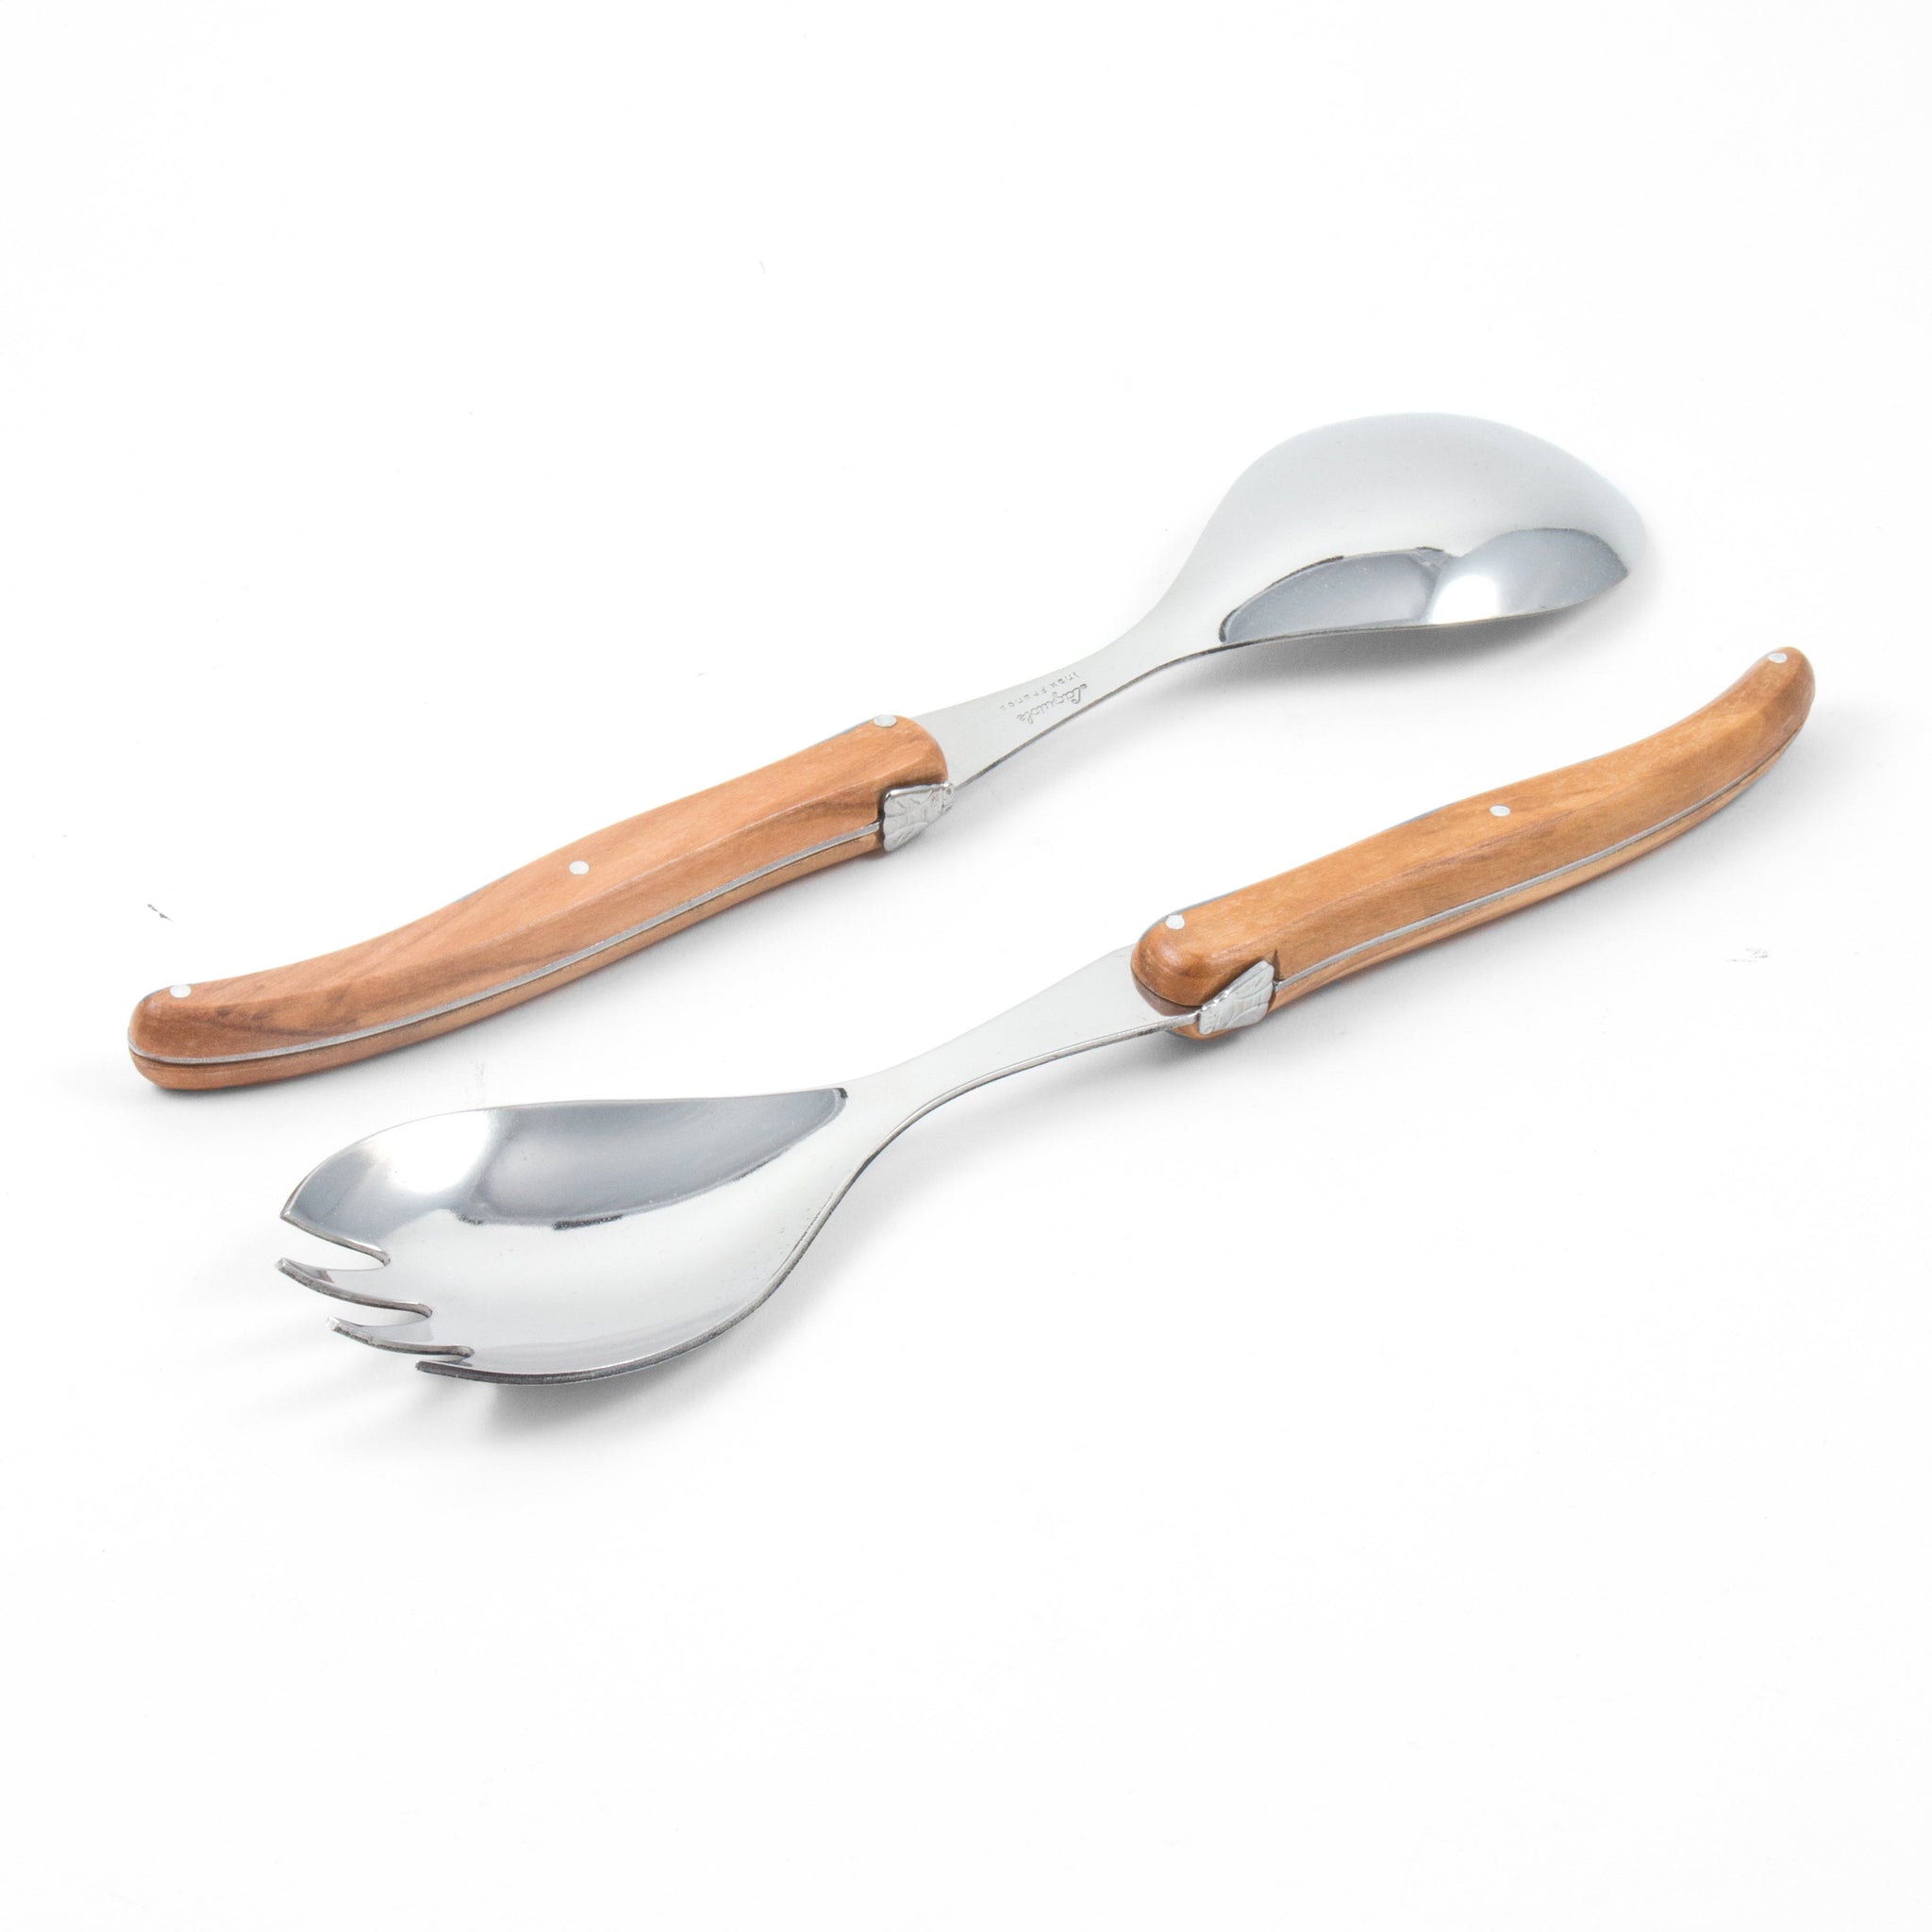 Gift Set Featuring 2 Bottles, 250ml, With Olive Wood Salad Servers